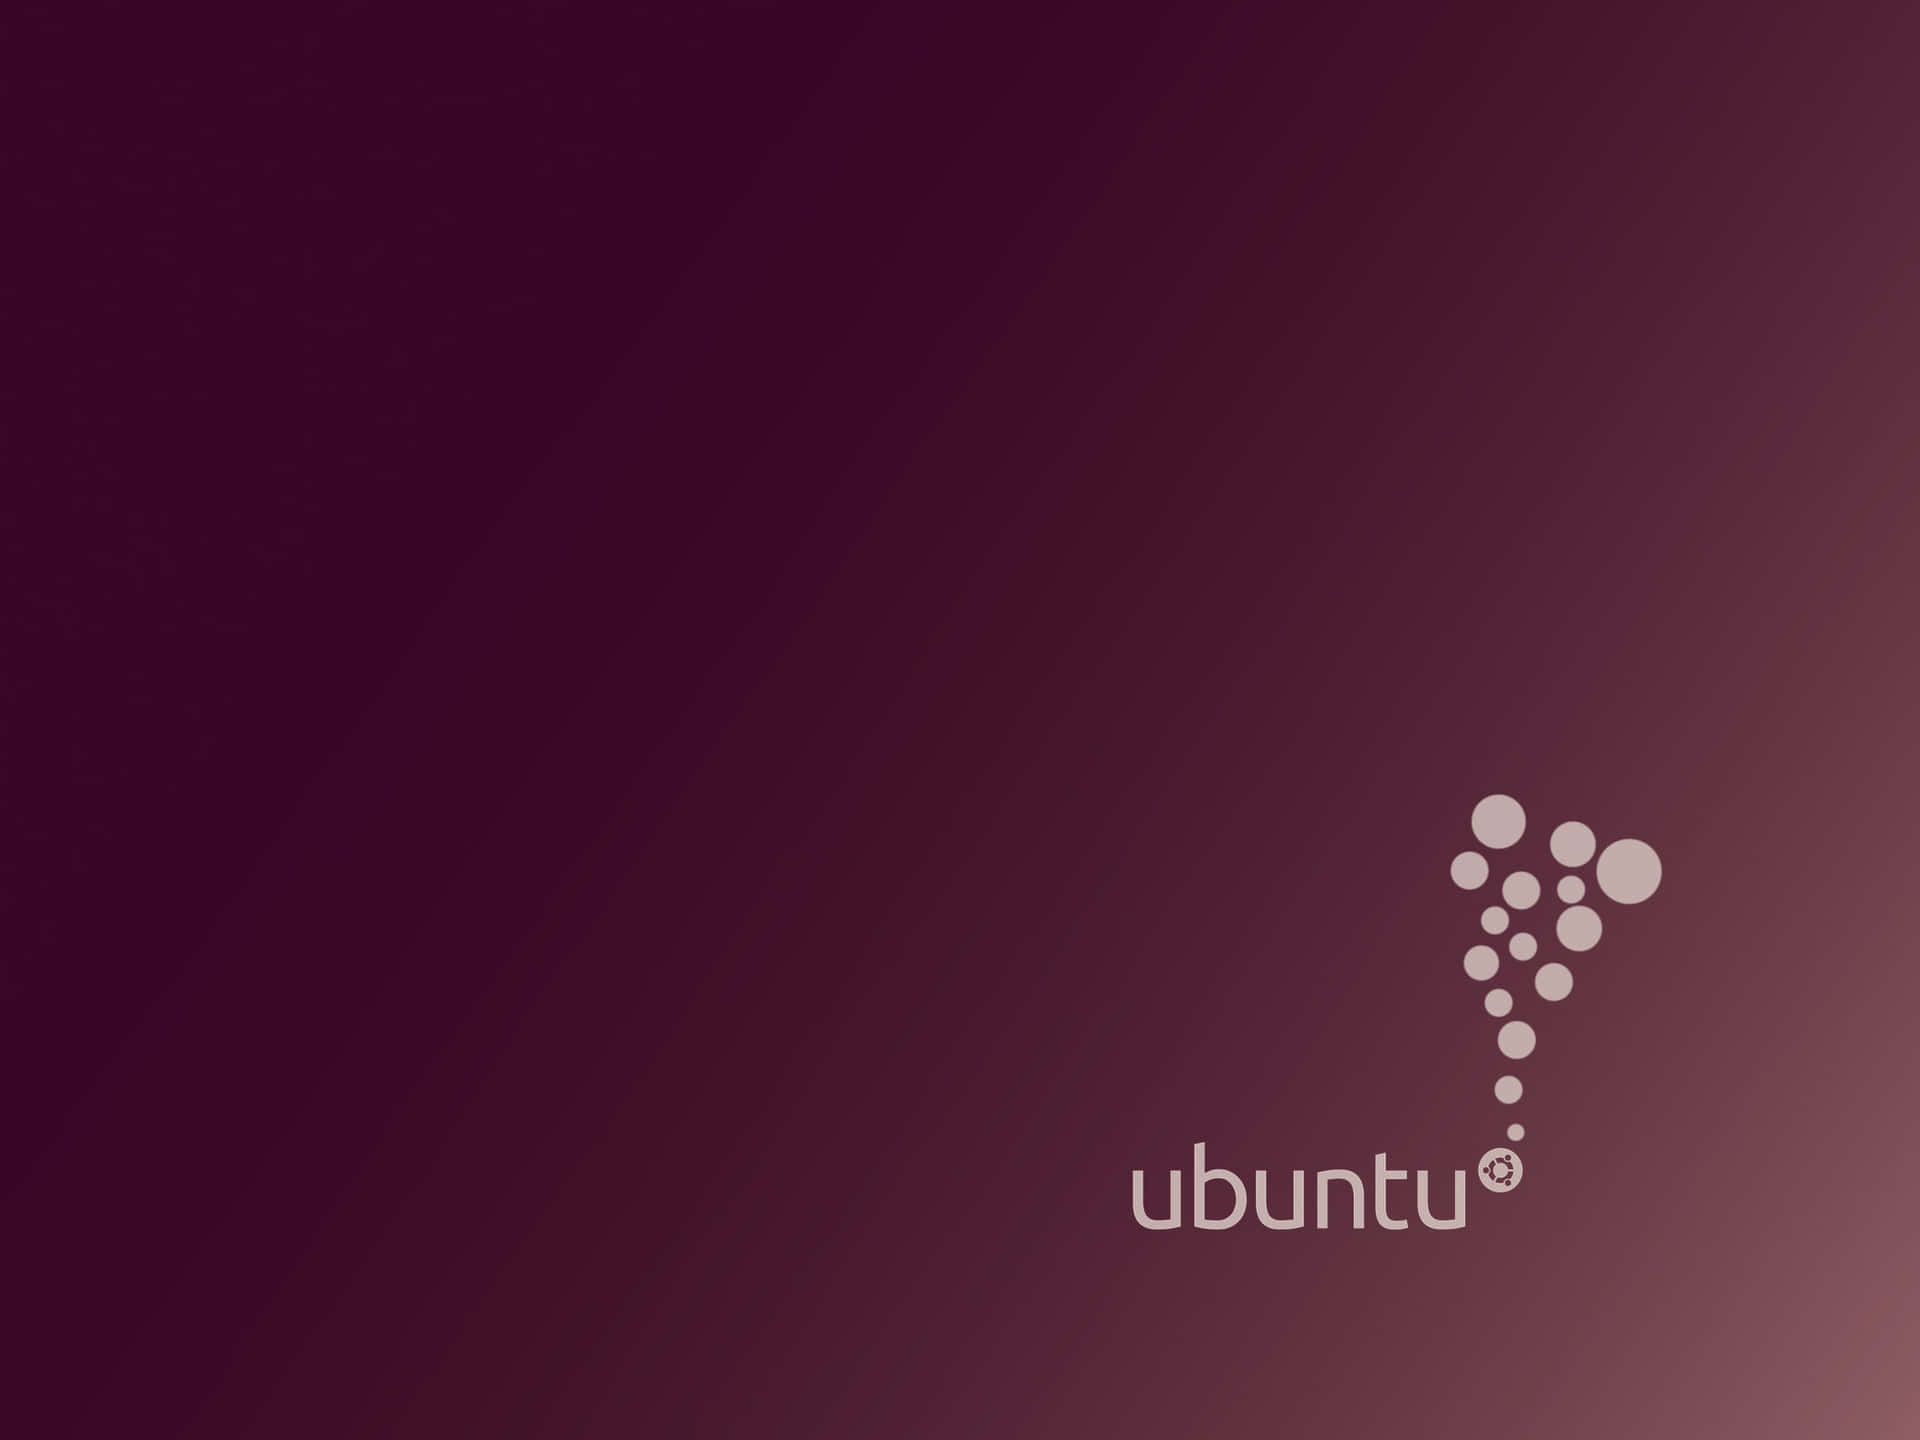 Get the most out of your Ubuntu experience